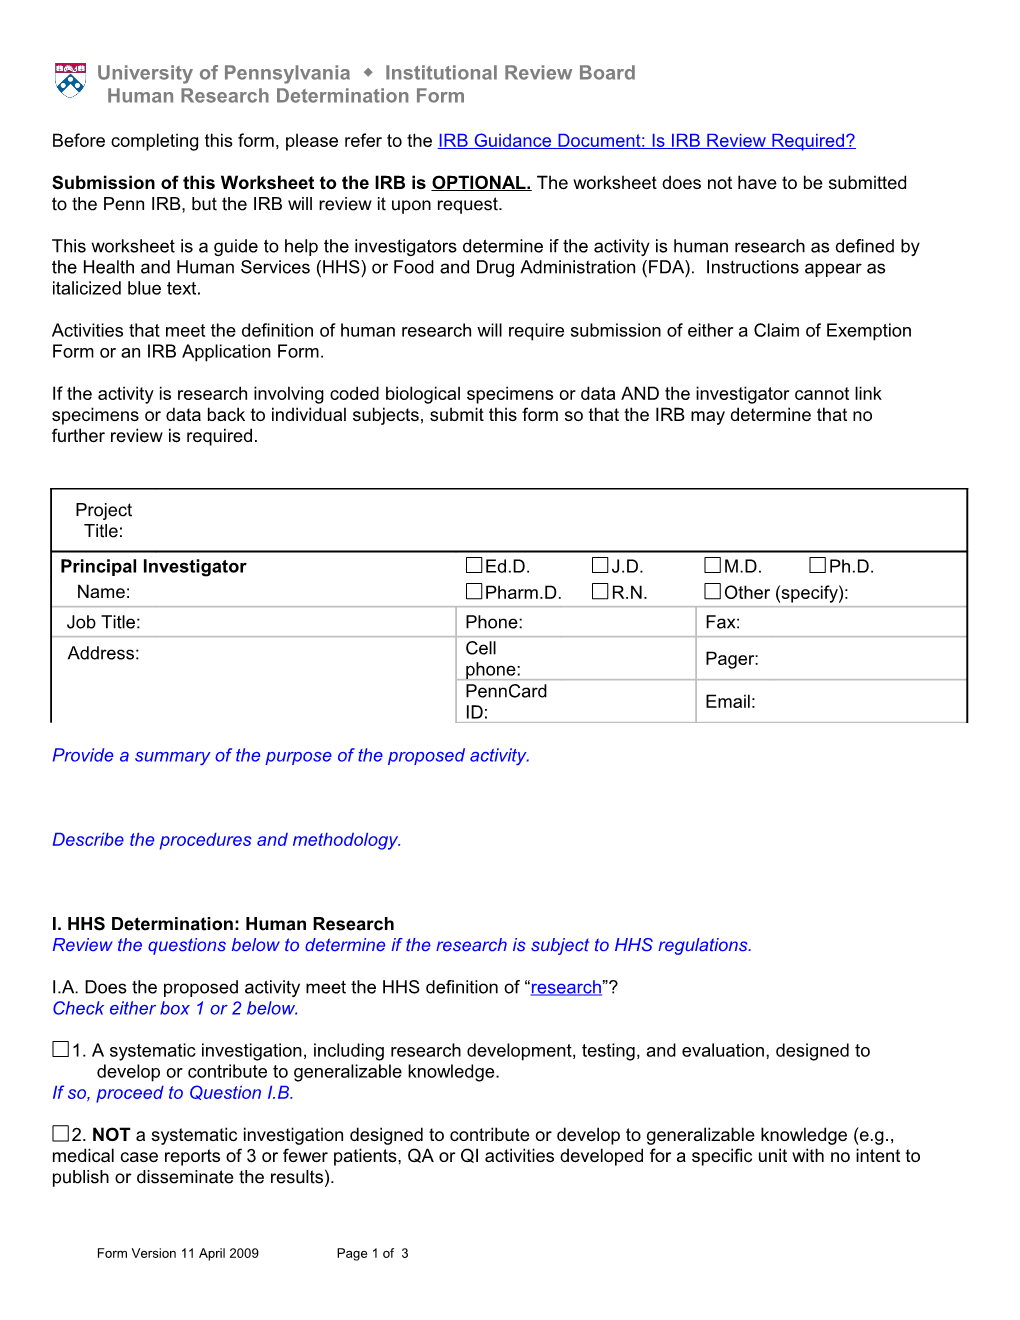 Human Research Determination Form